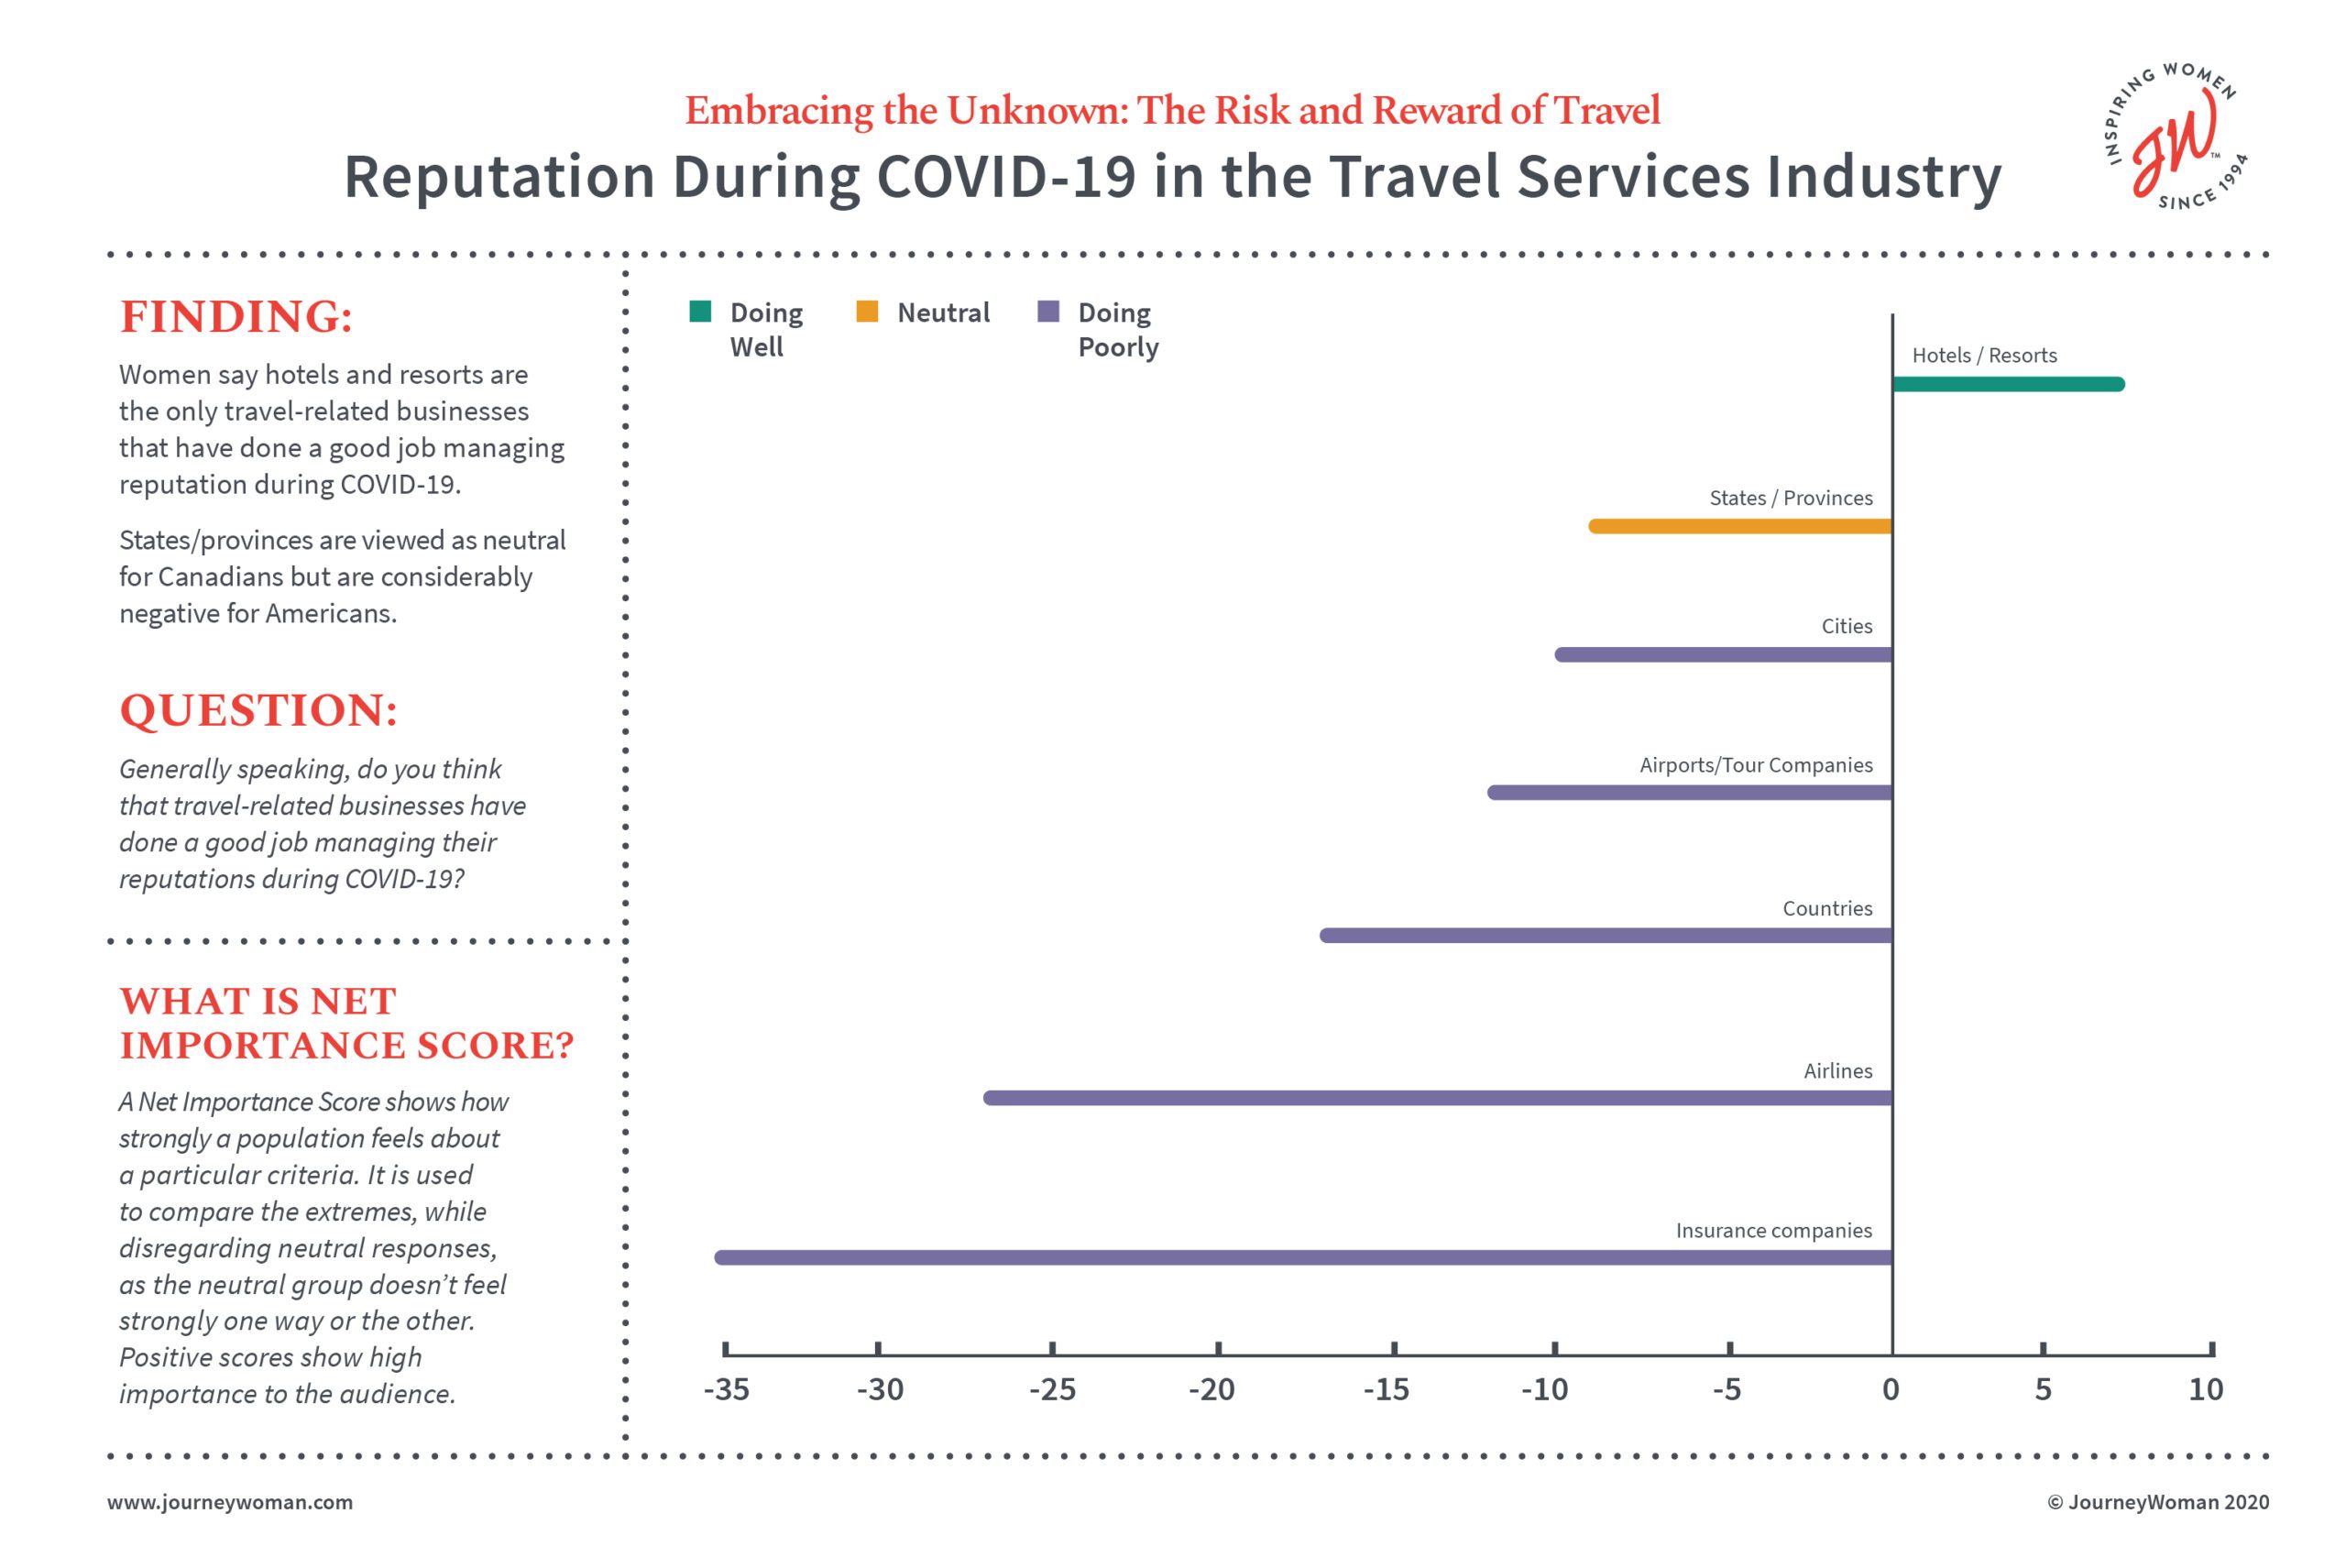 JW Infographic - Reputation during COVID-19 in the travel services industry